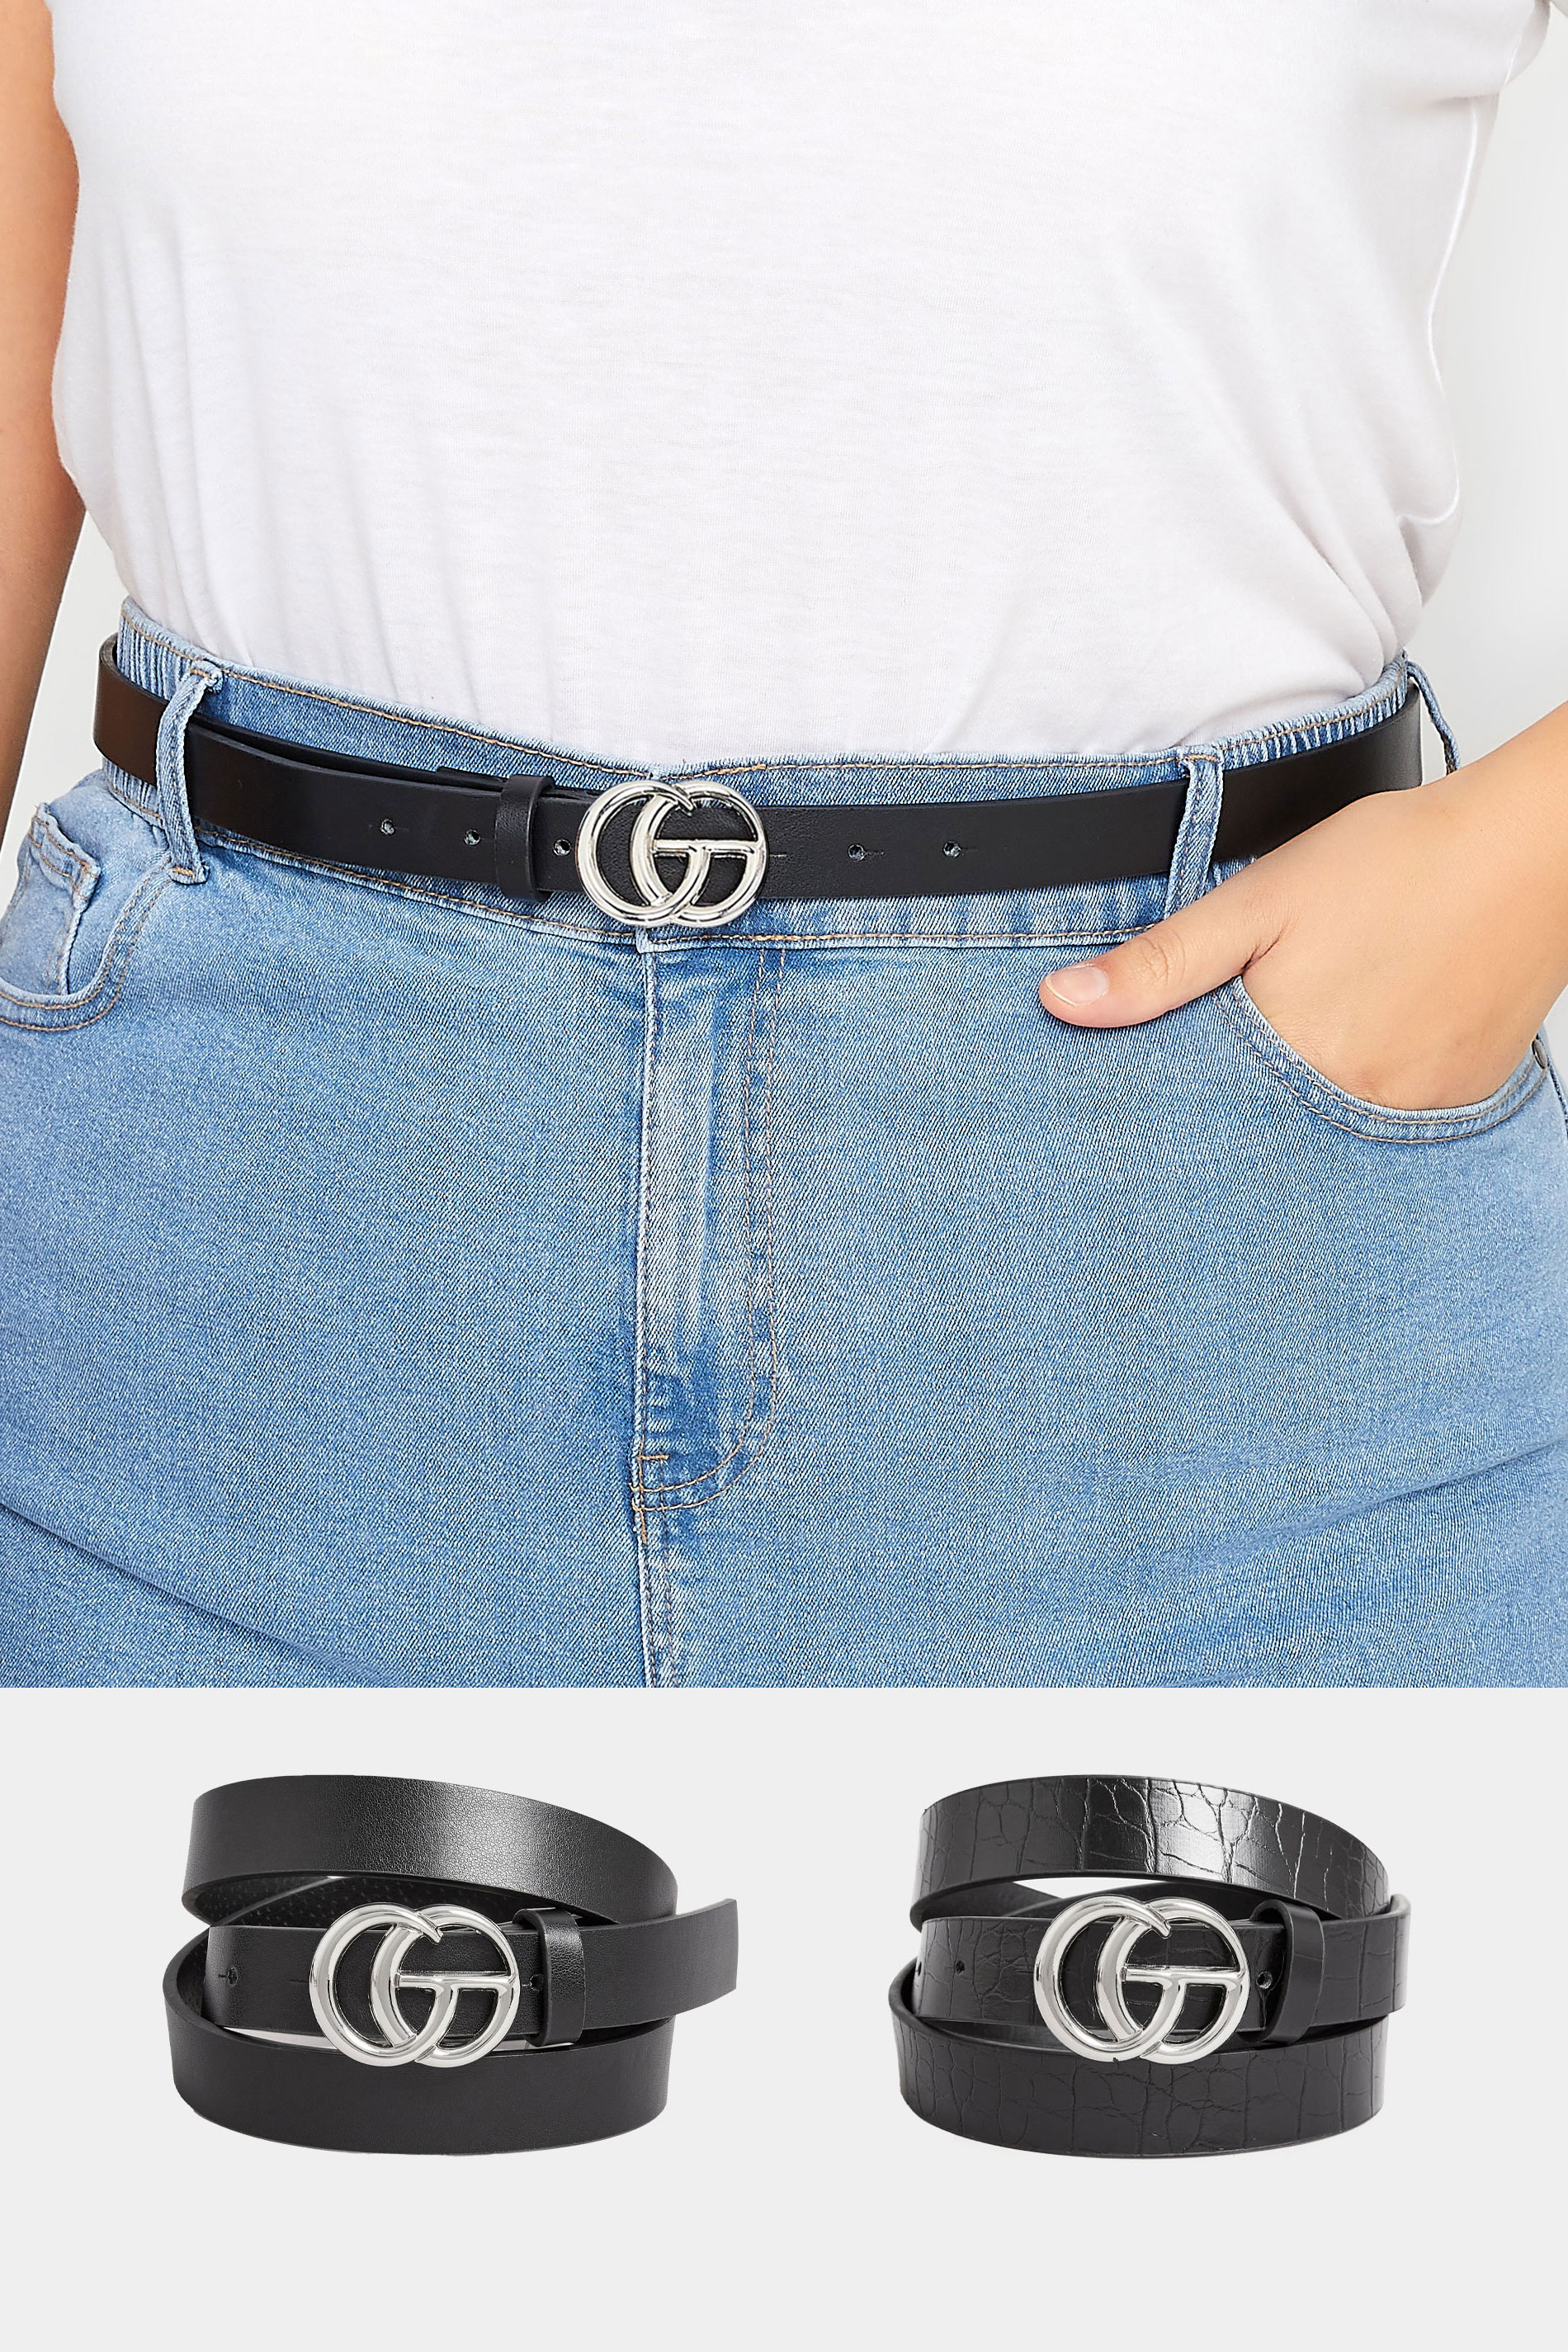 2 PACK Black & Croc Print Initial Logo Belts | Yours Clothing 1